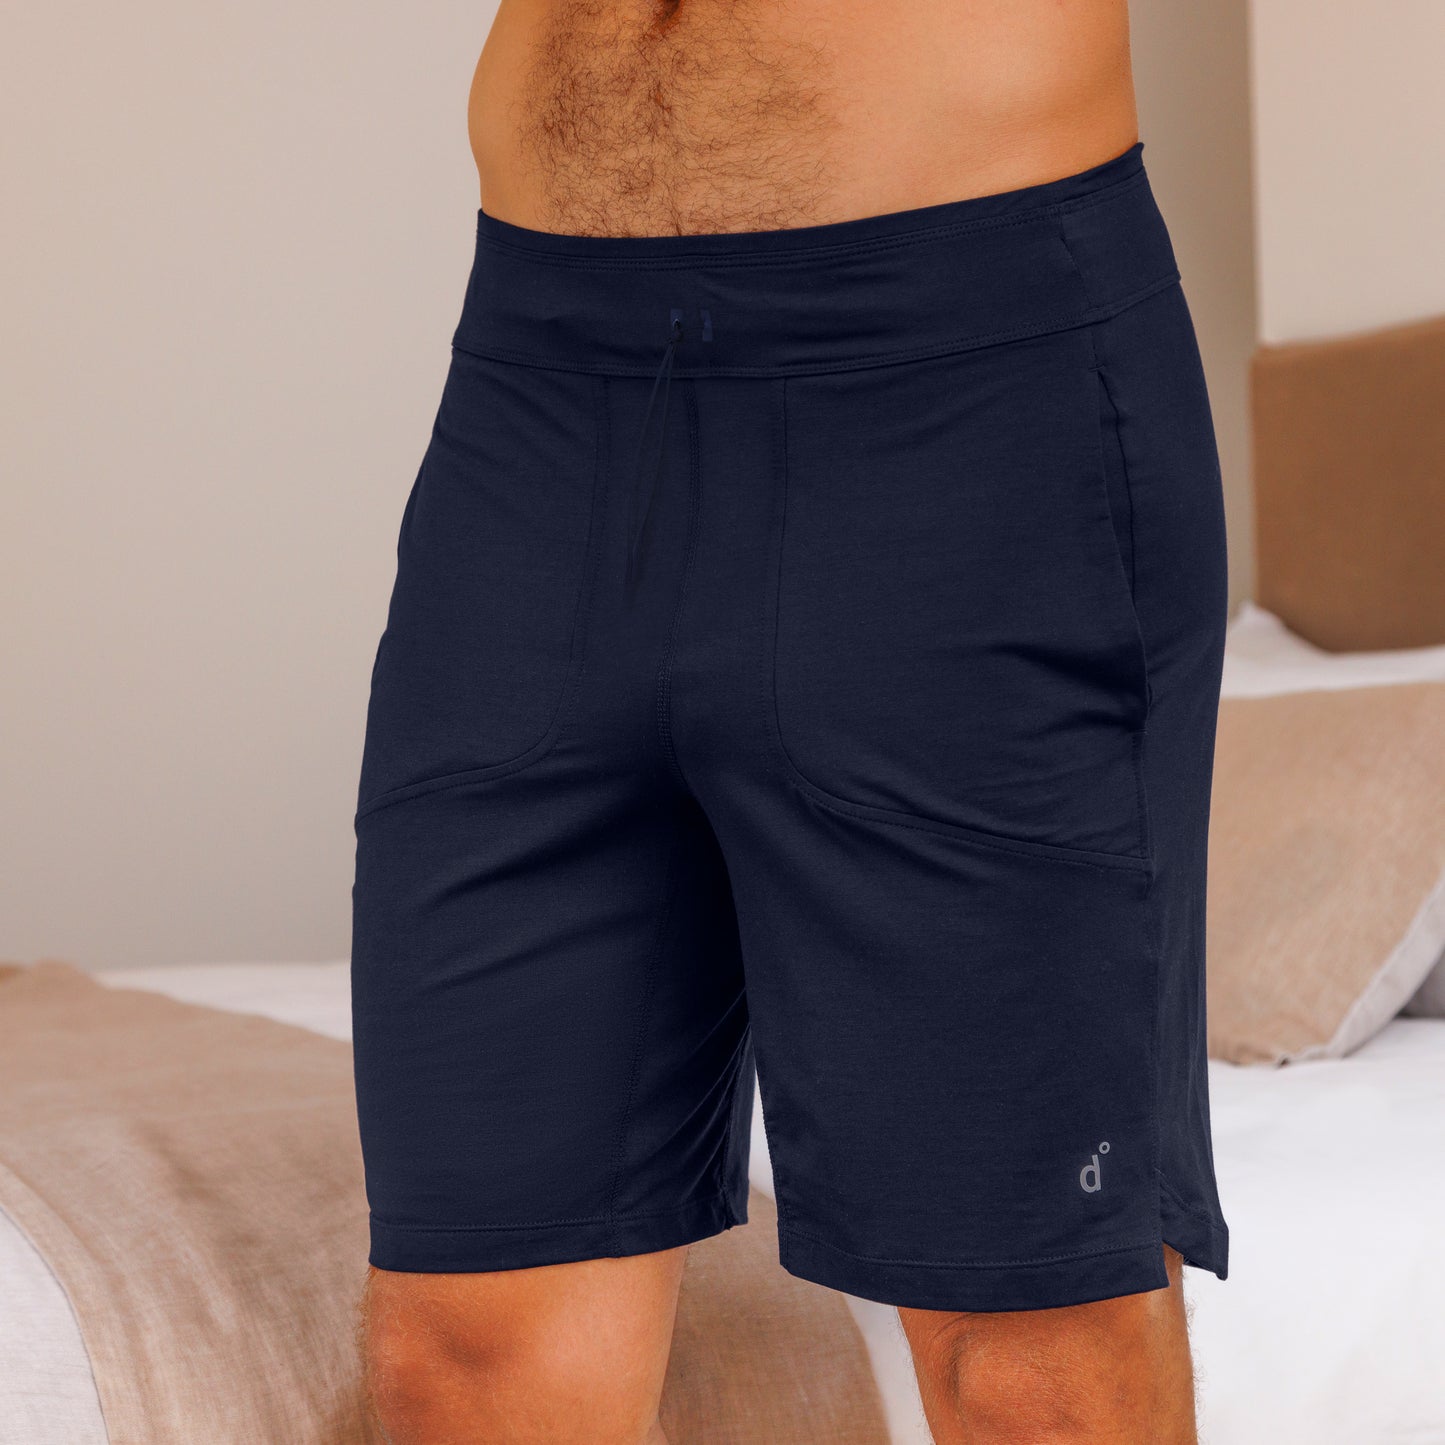 Muscle recovery sleep shorts men || Navy